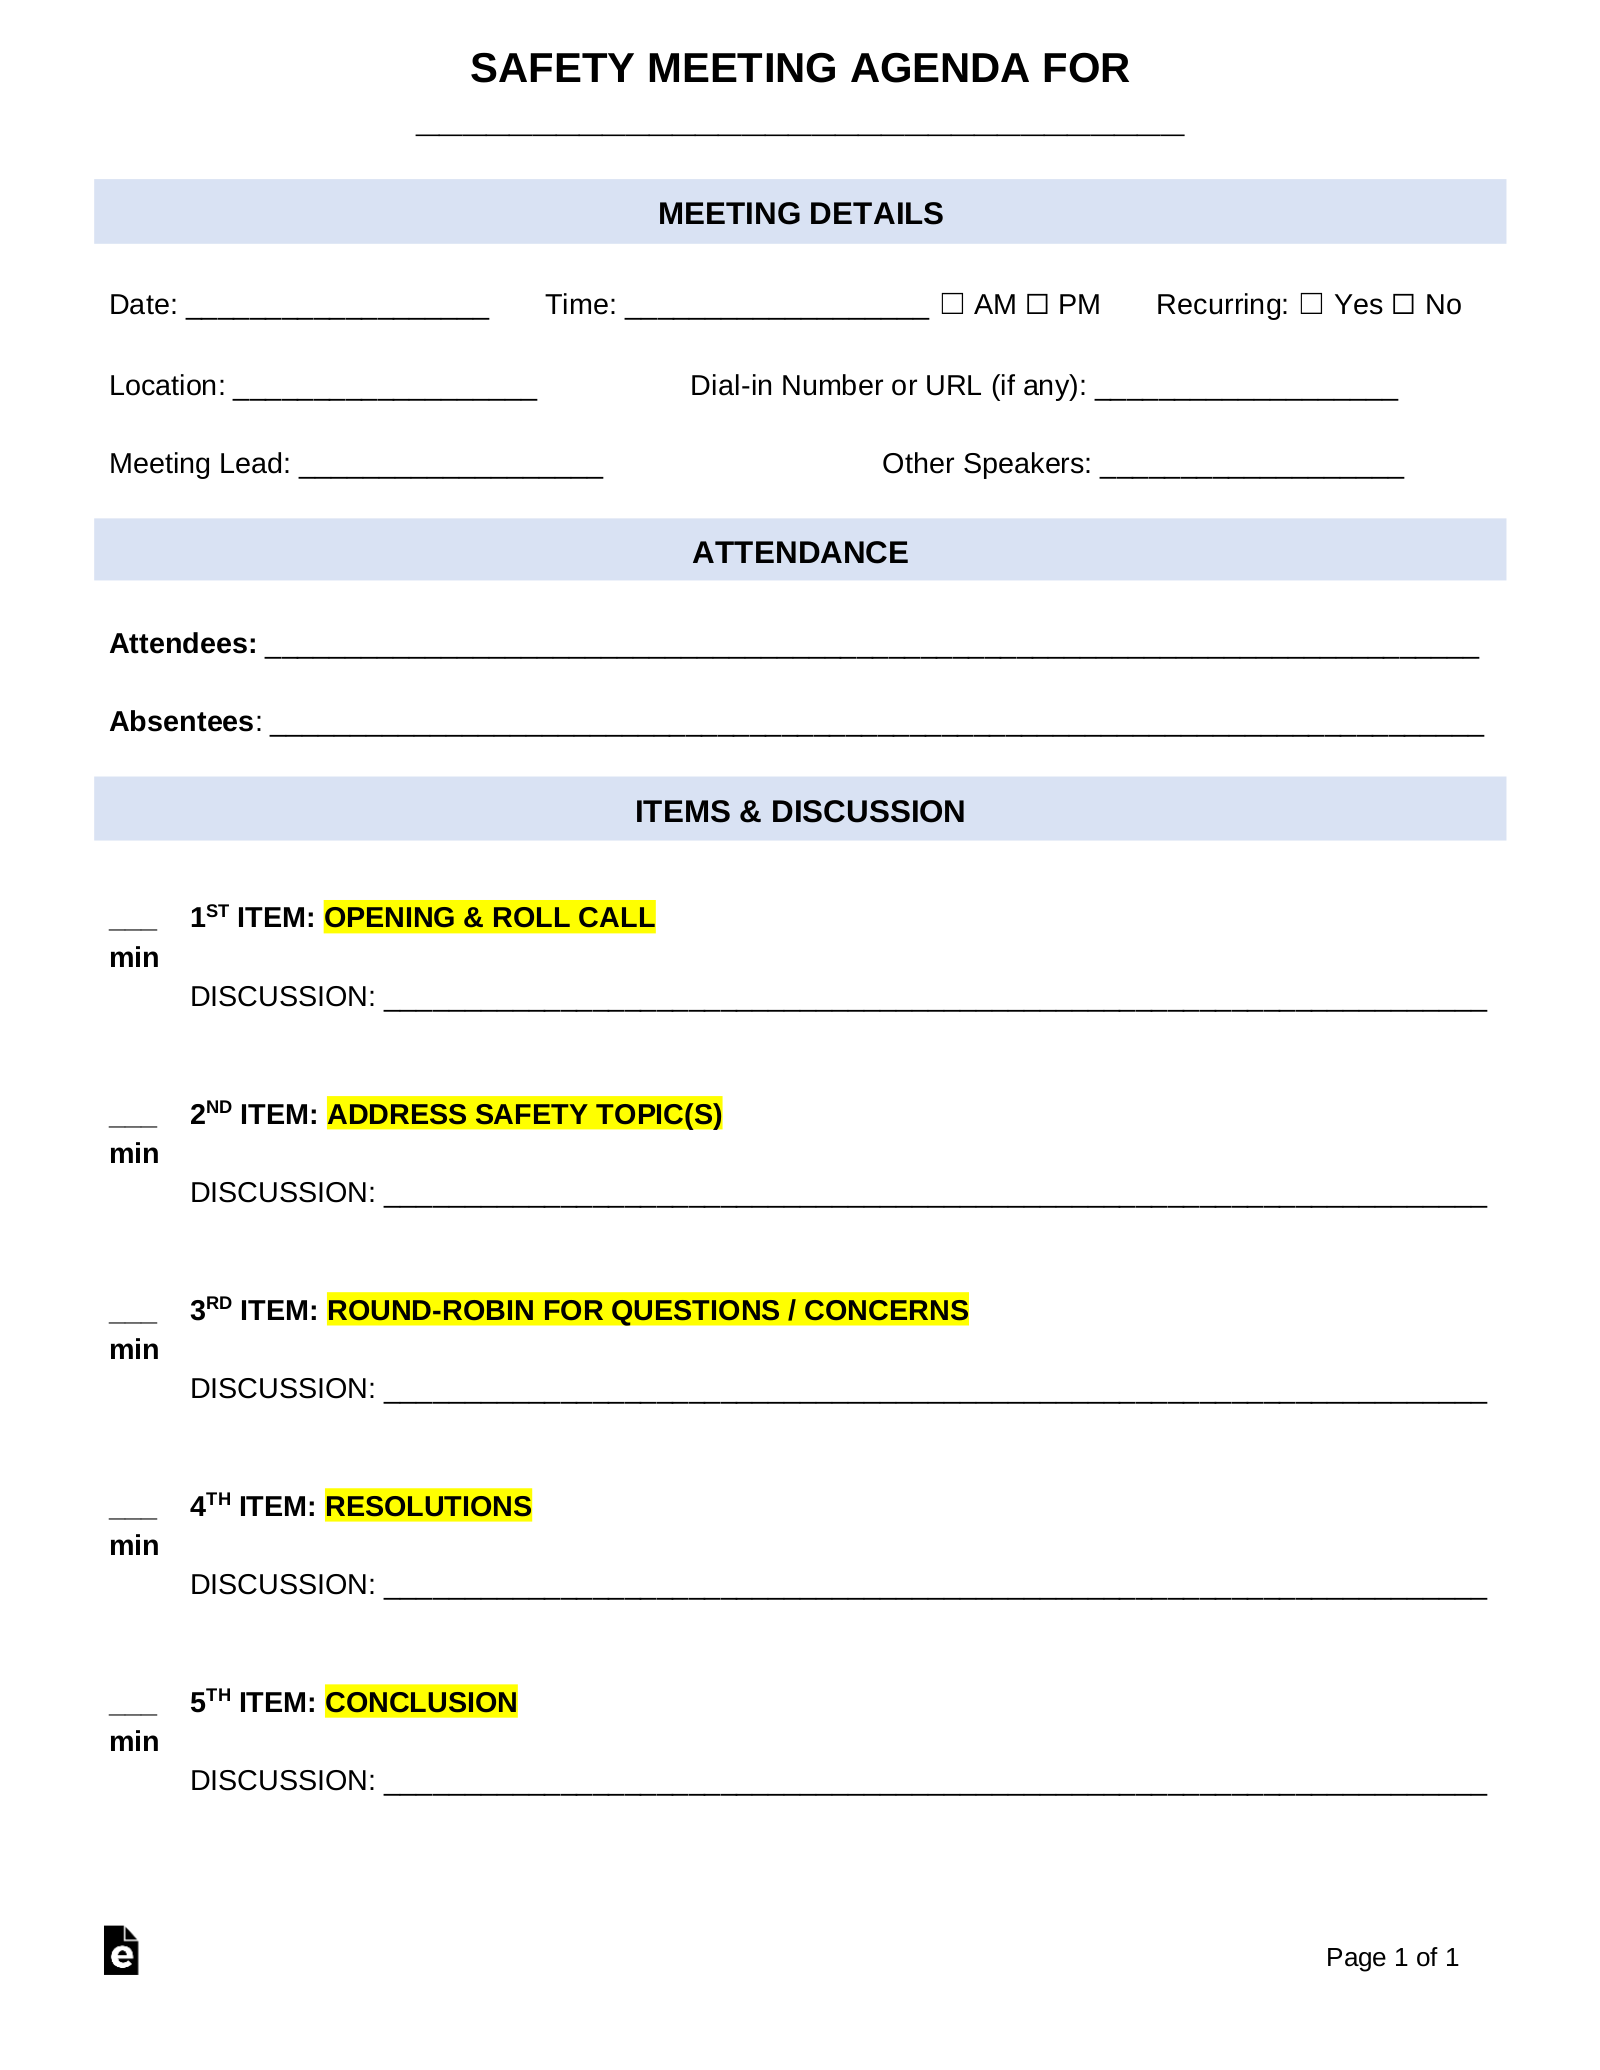 Safety Meeting Agenda Template | Sample